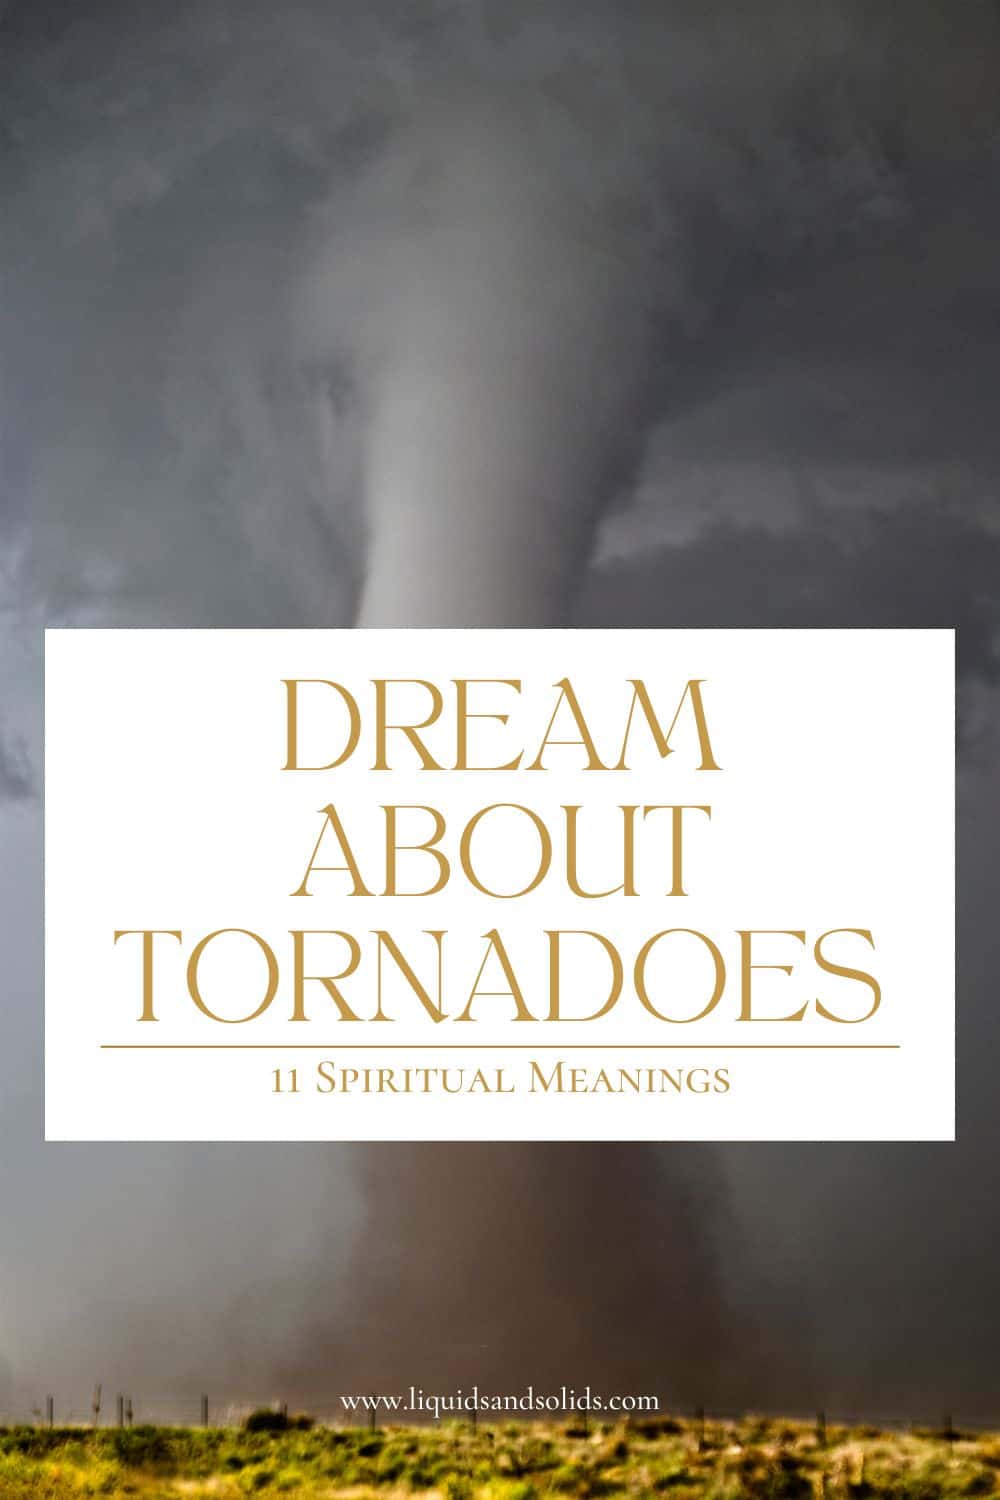 What does it mean when you Dream about Tornadoes?